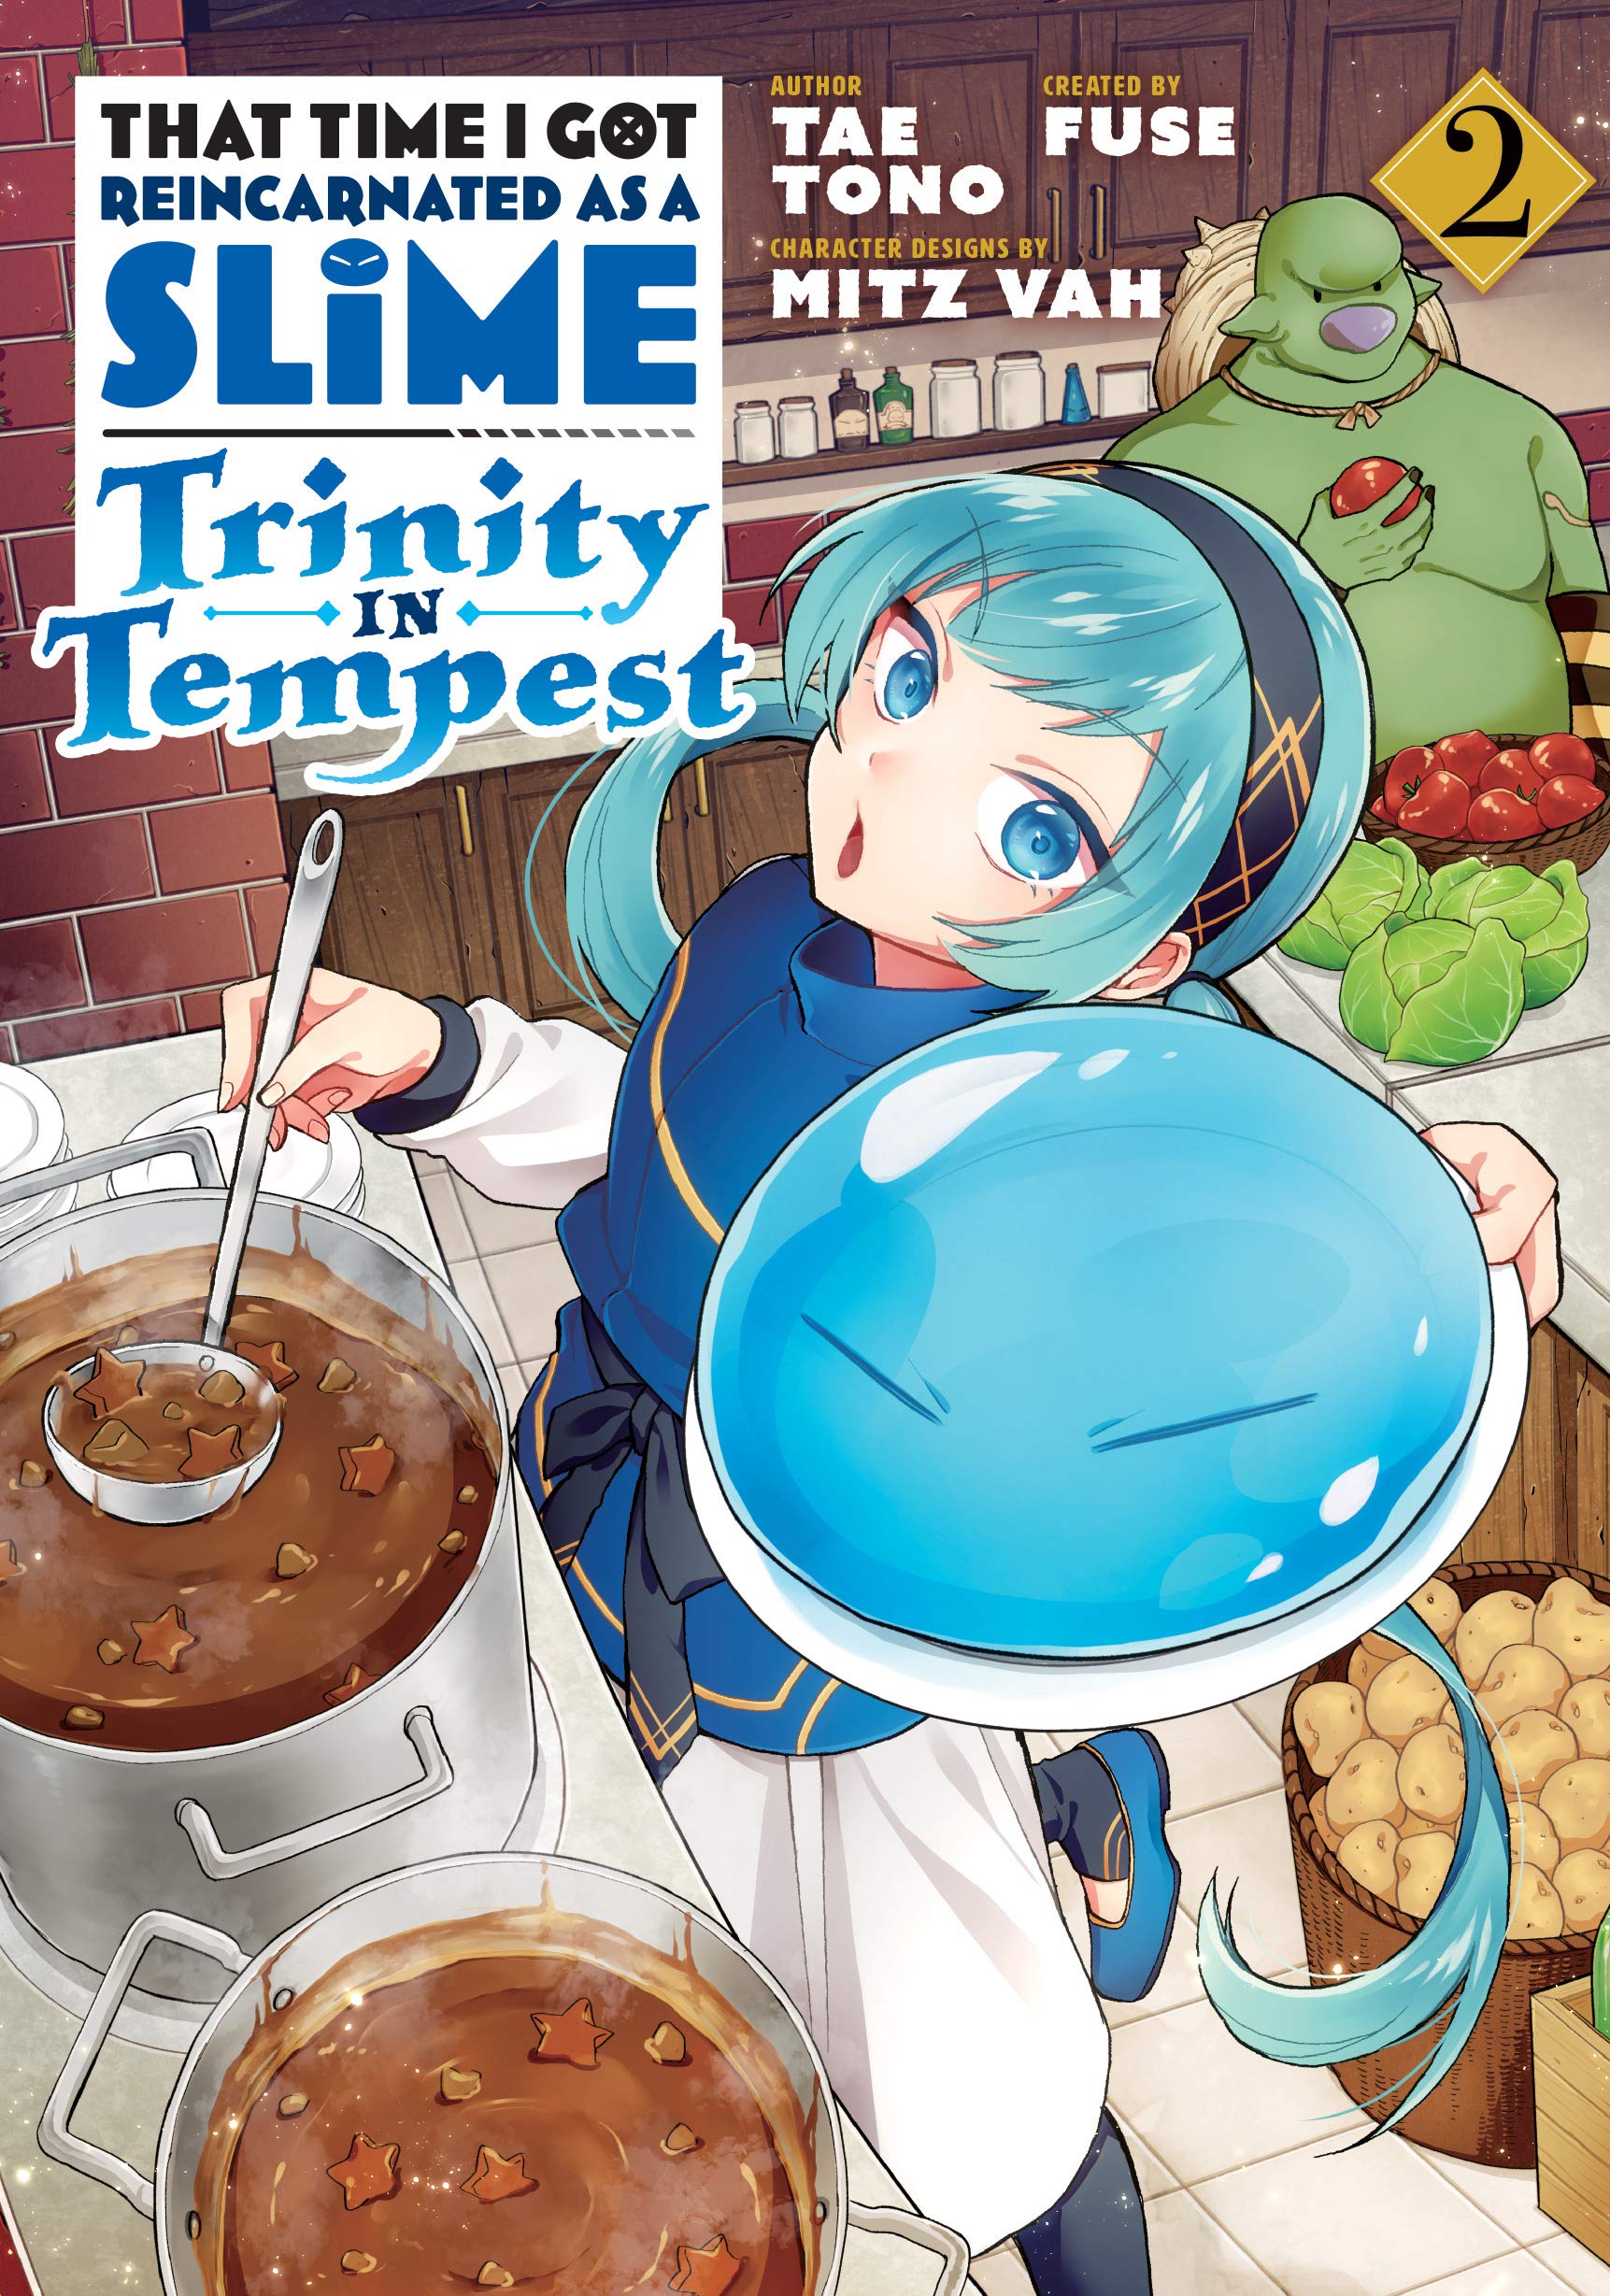 That Time I Got Reincarnated as a Slime. Trinity in Tempest. Vol. 2 | Fuse, Tae Tono